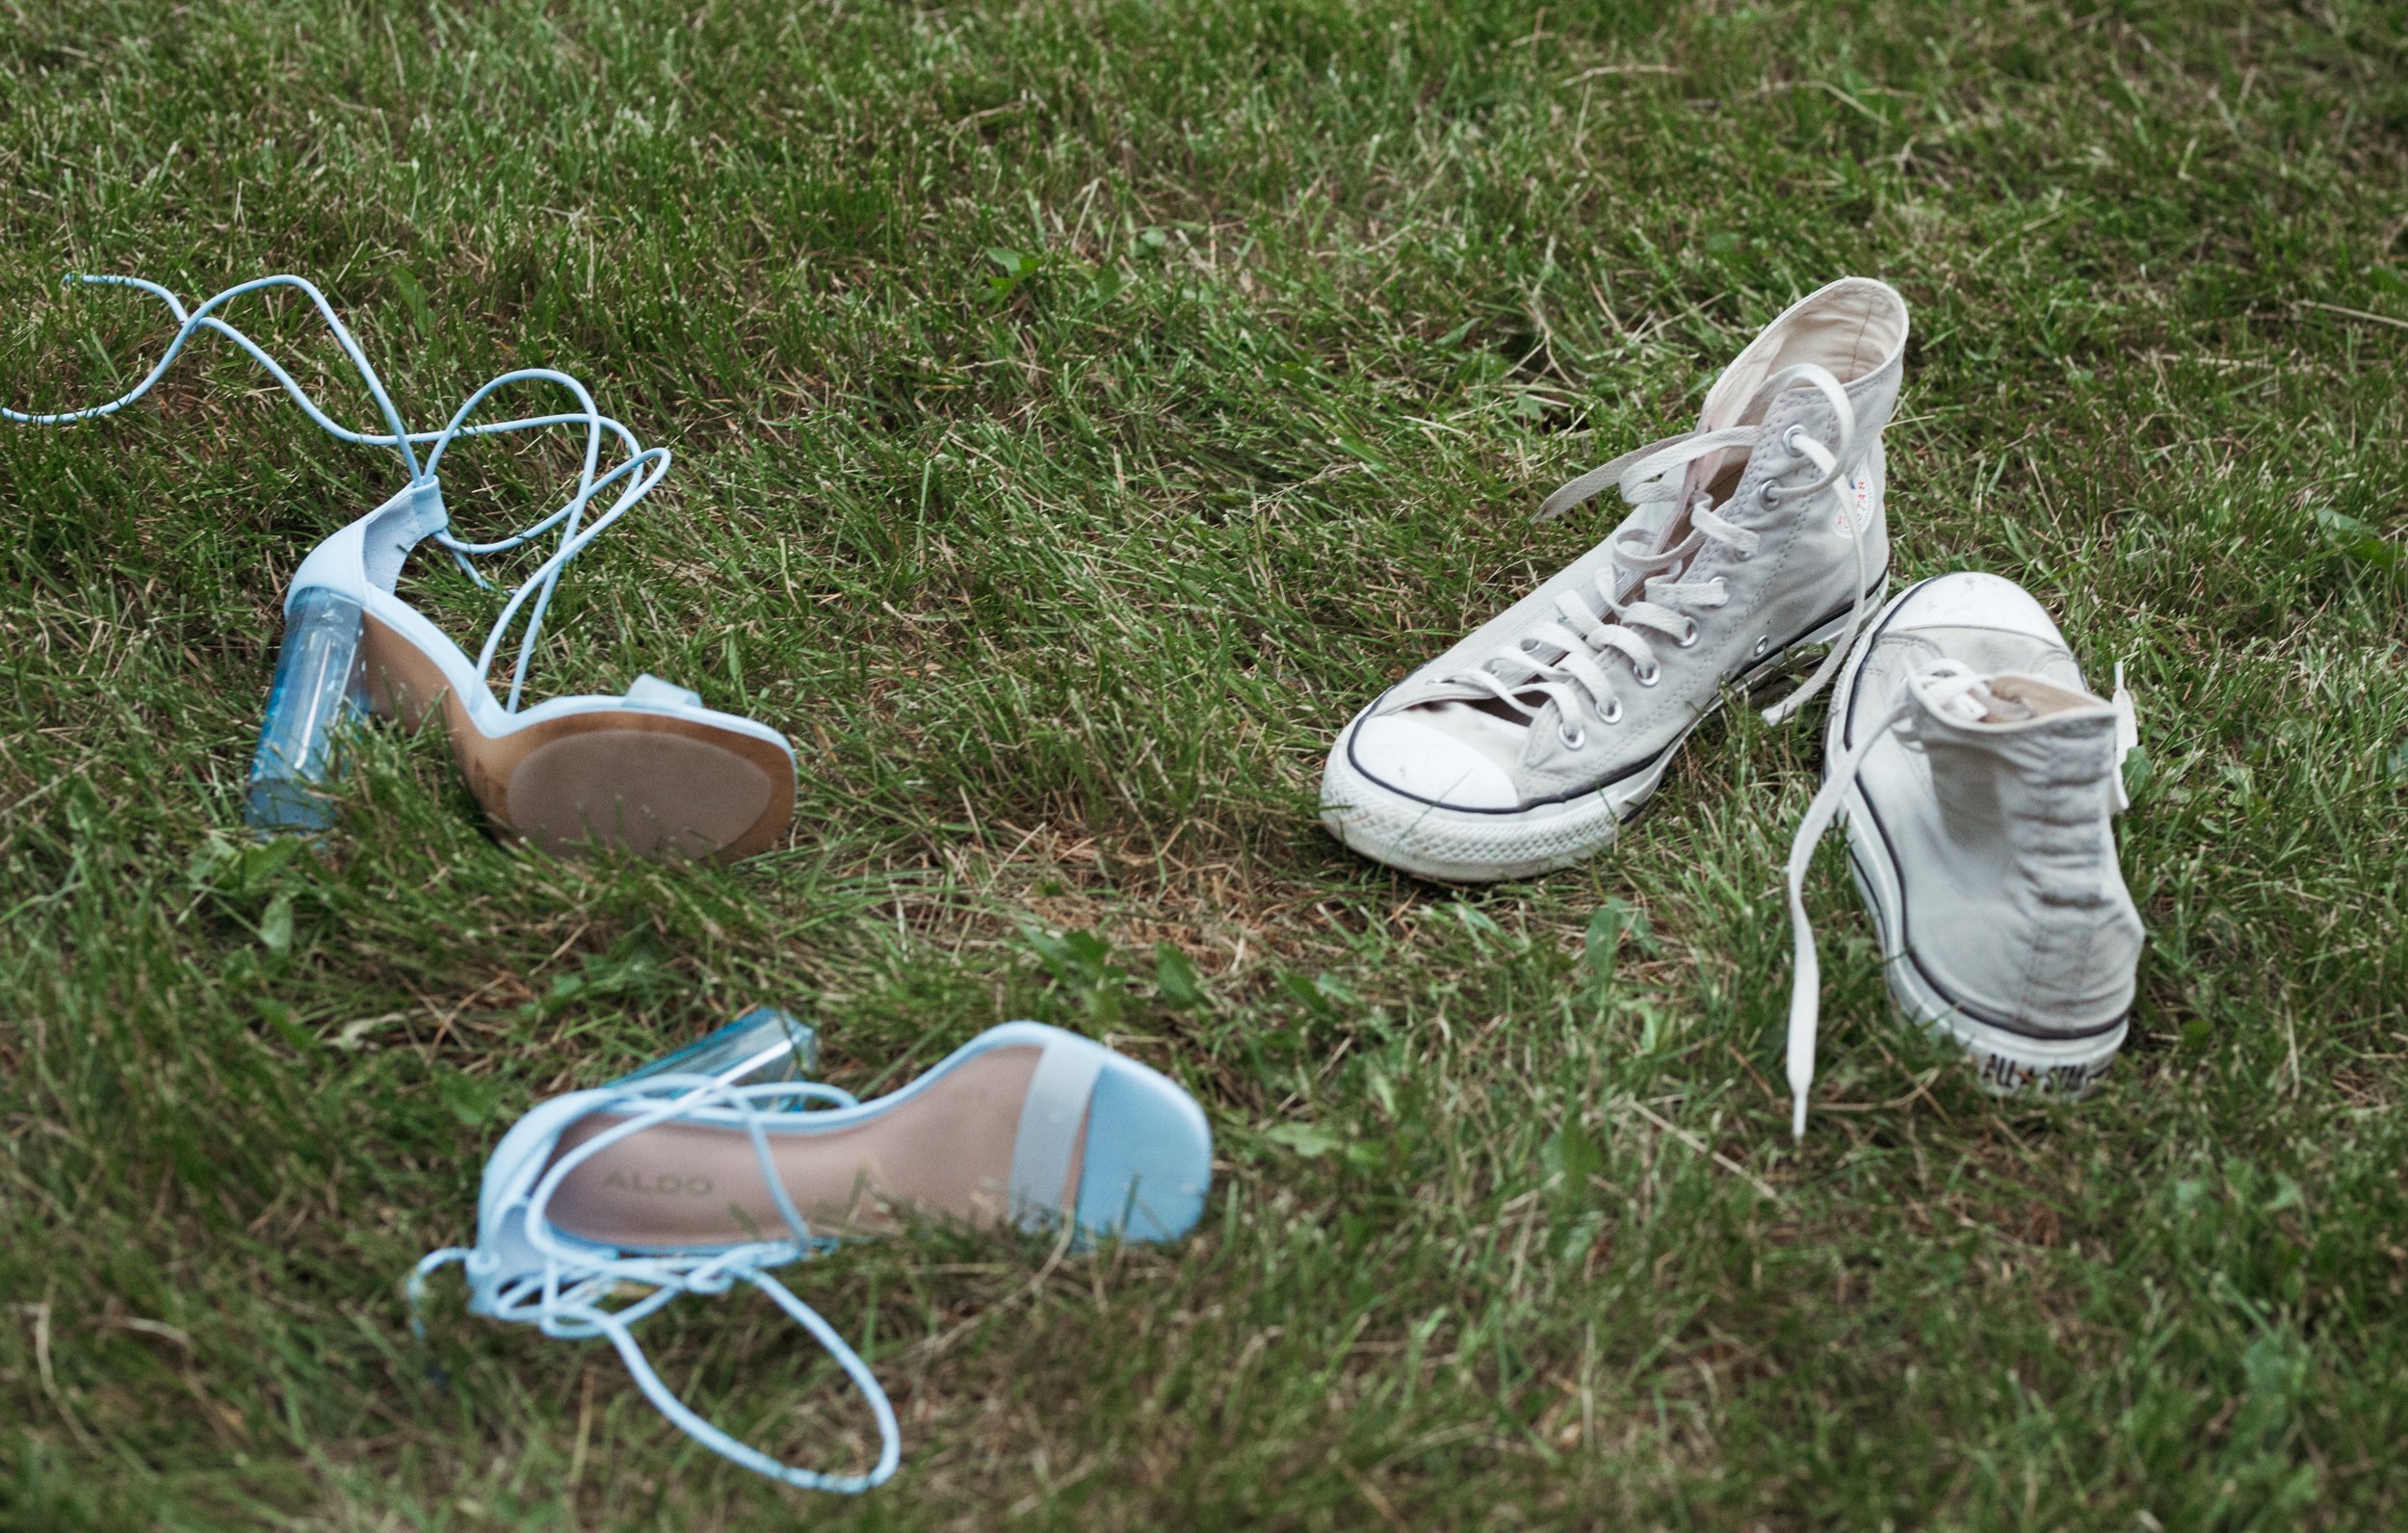  Baby blue strappy high heel shoes and a pair of mens high top sneakers lay  strewn in the grass. 